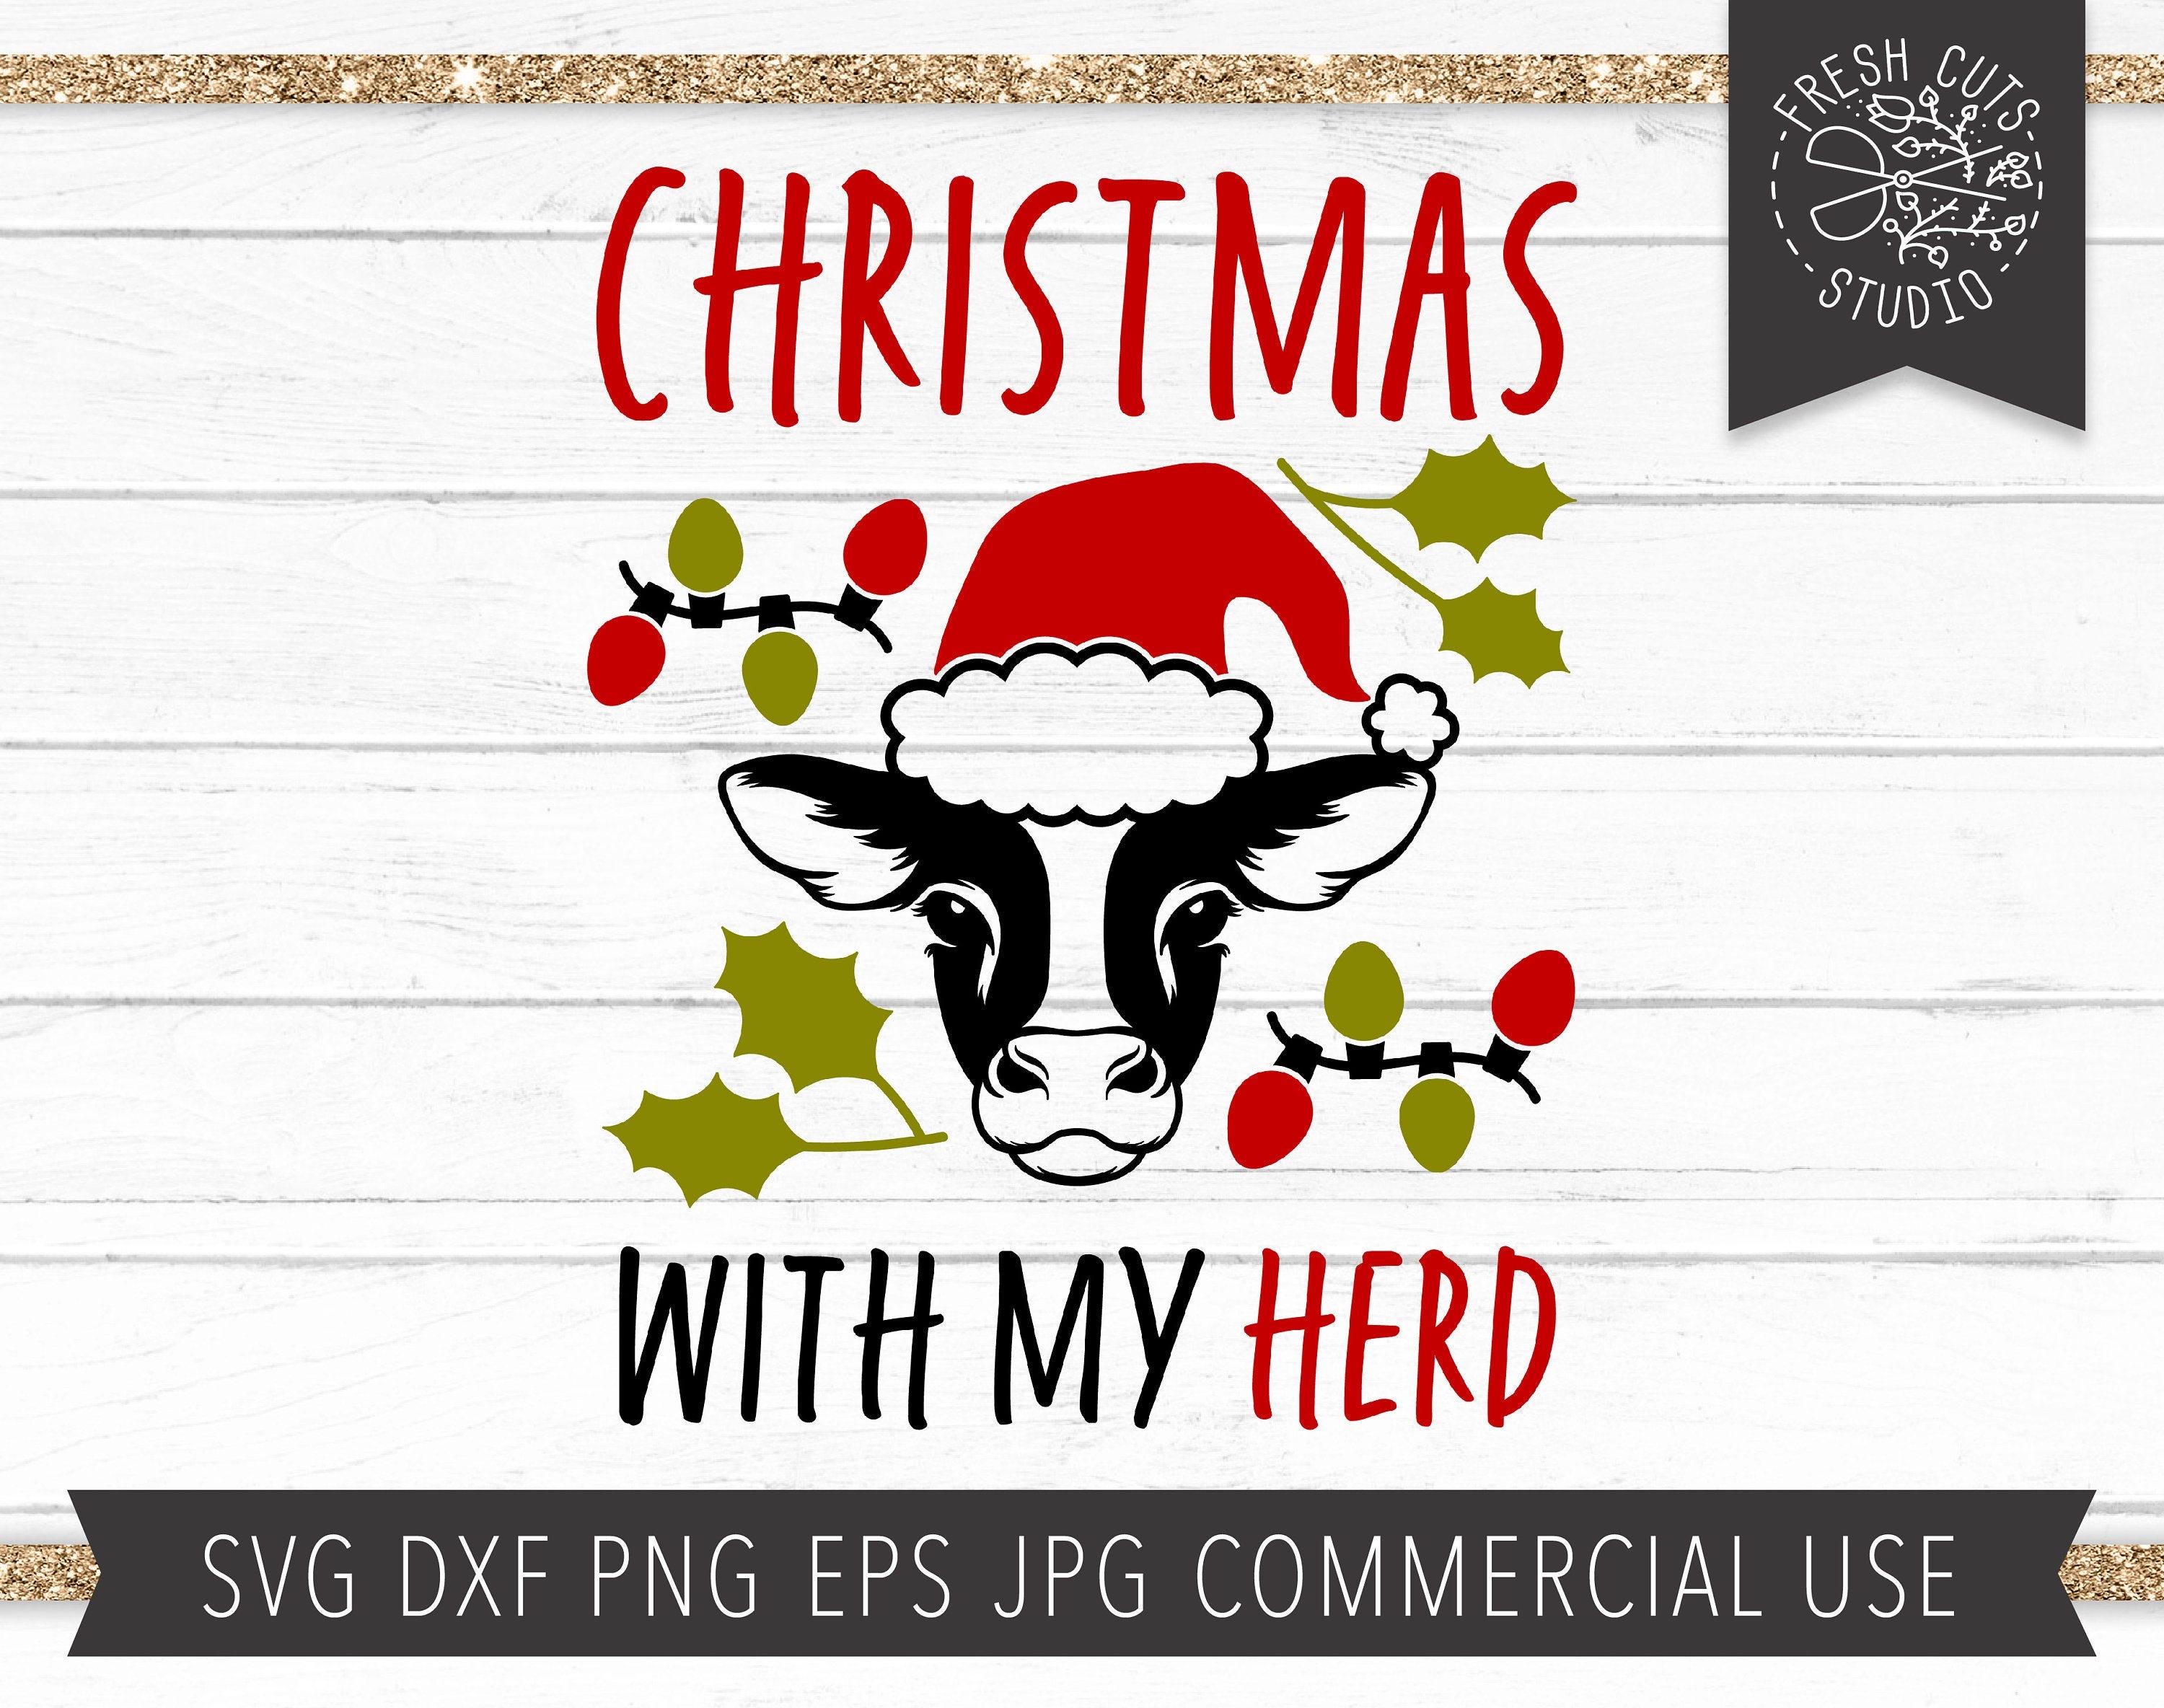 Christmas Cow SVG Cut File for Cricut, Christmas with my Herd svg, Cow with Santa hat svg for Christmas Shirt, Holiday Dairy Cow Calf